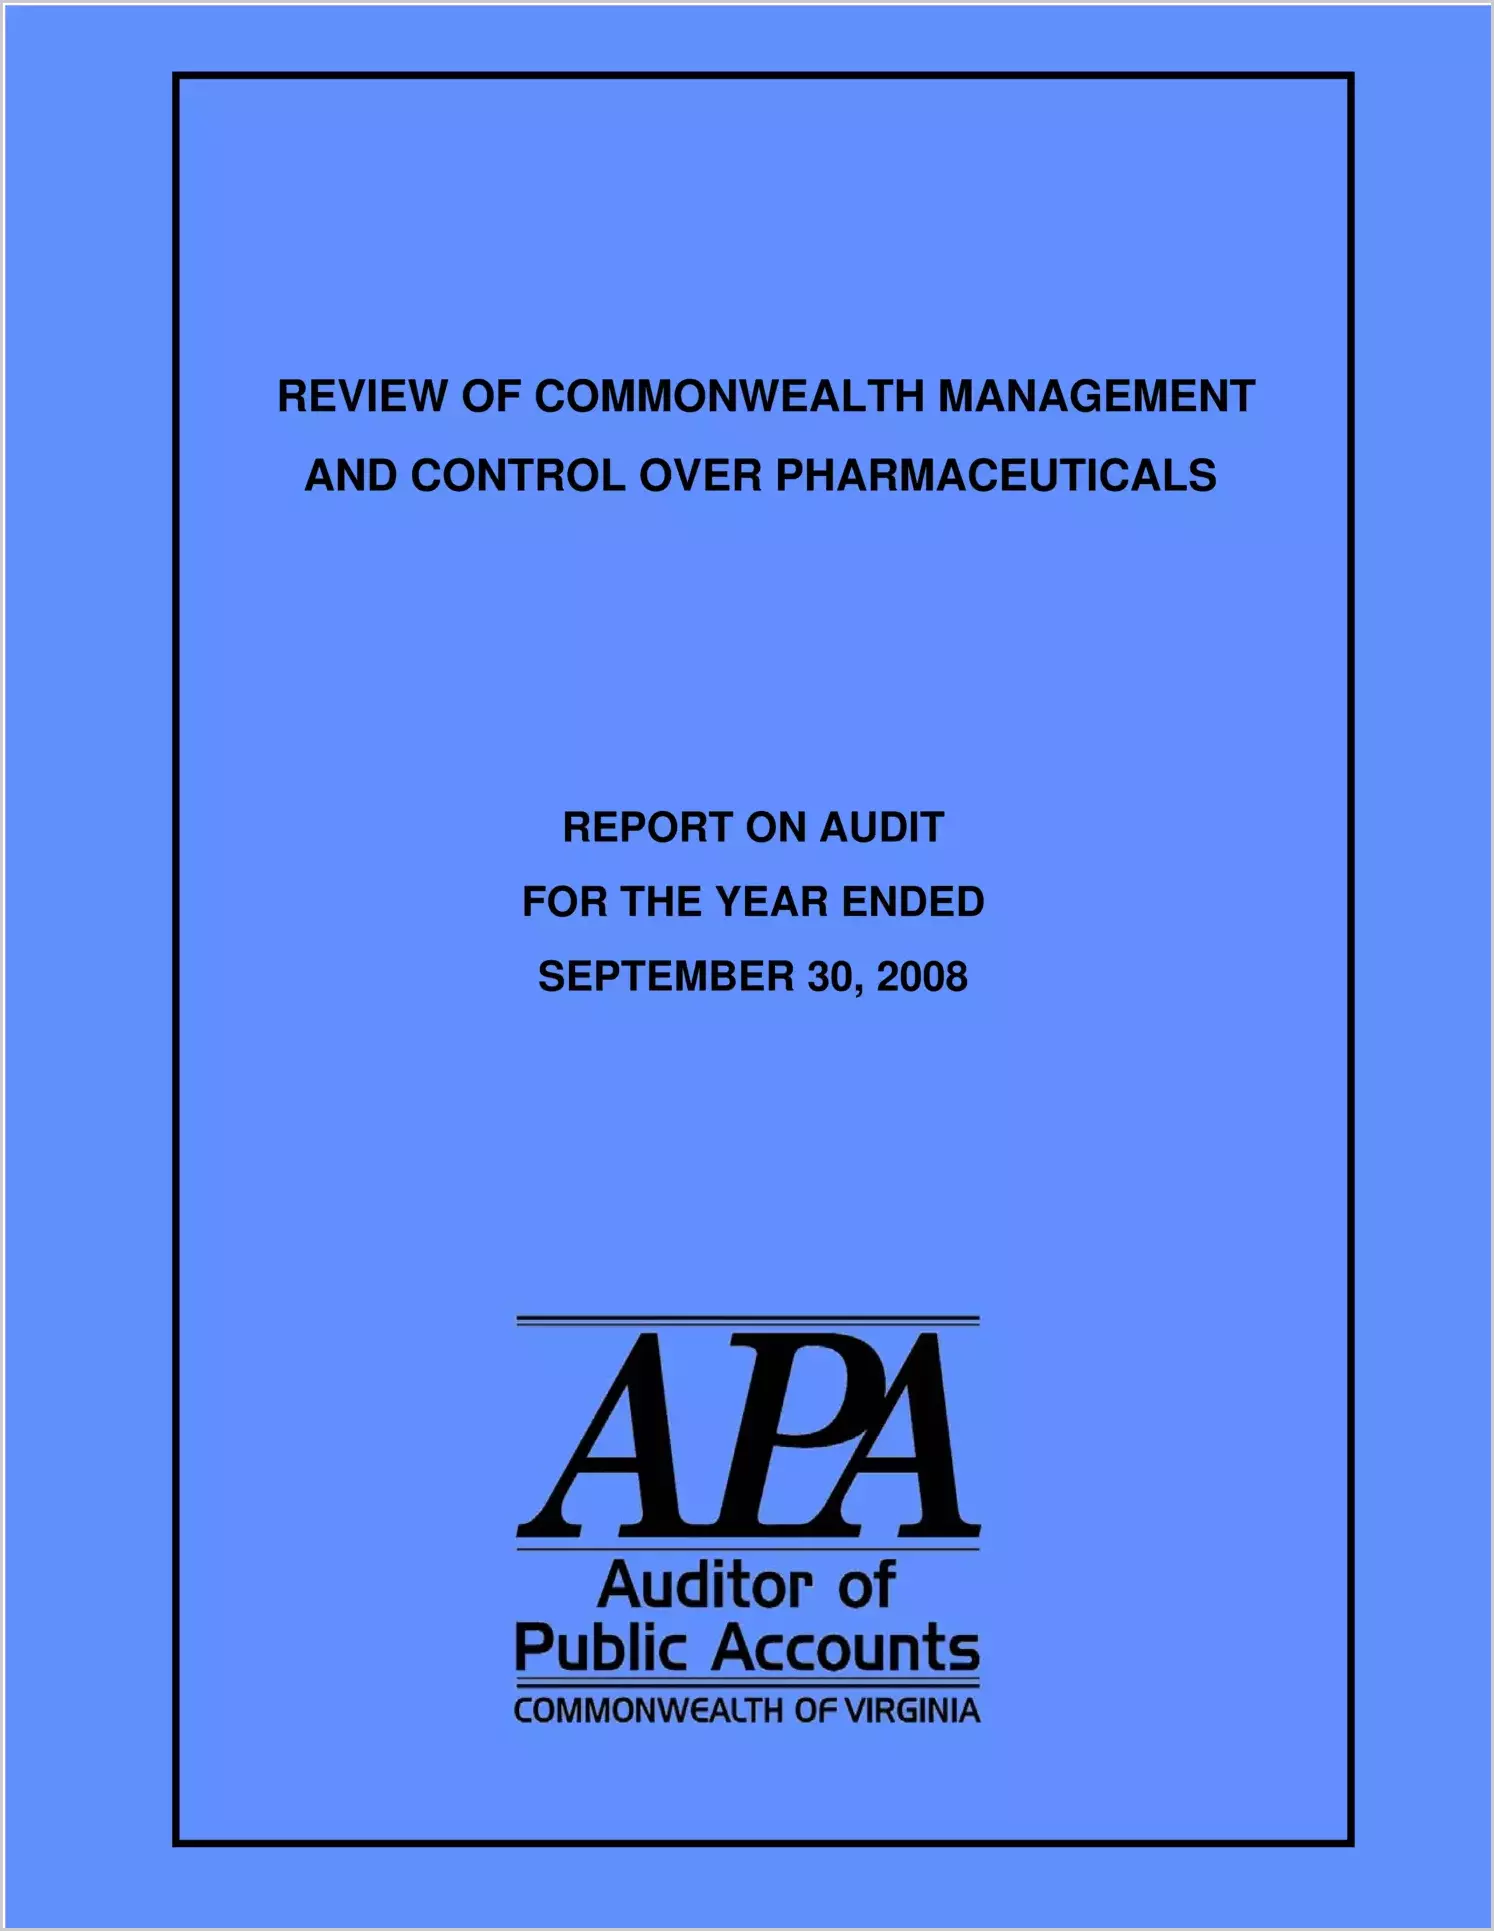 Review Of Commonwealth Management and Control Over Pharmaceuticals for the Year Ended June 30, 2008